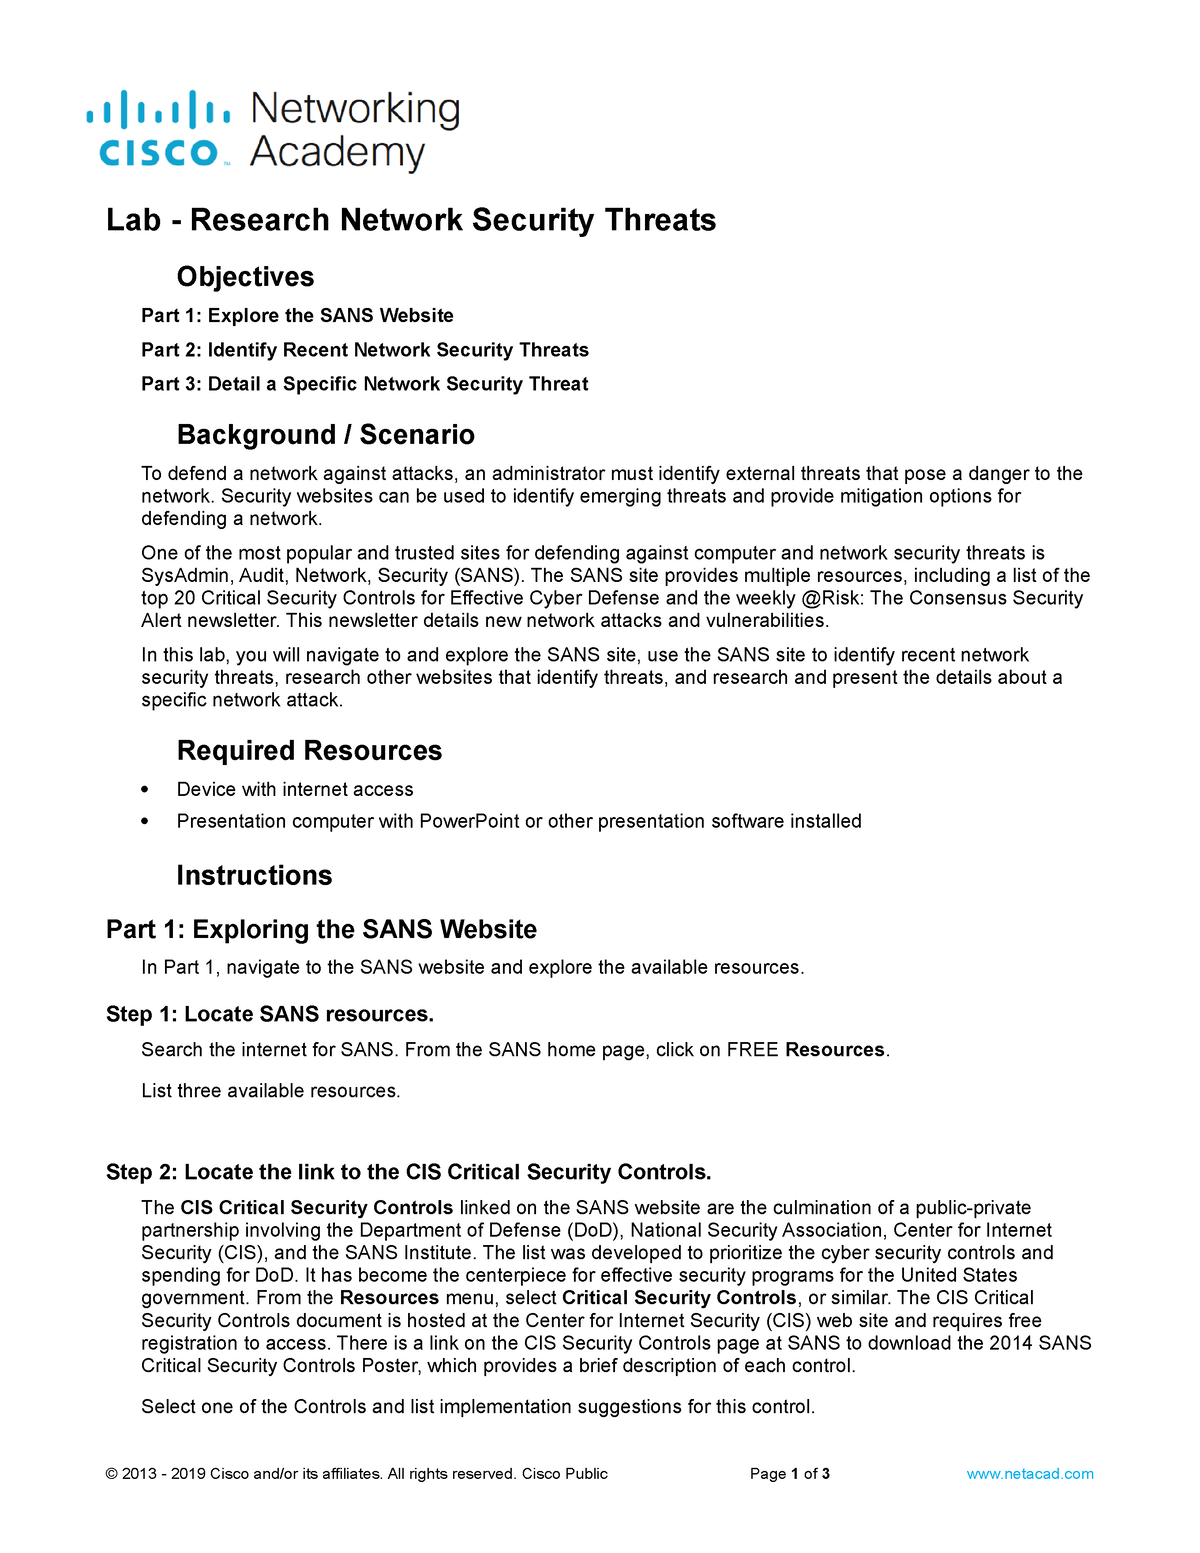 16.2.6 lab research network security threats answers